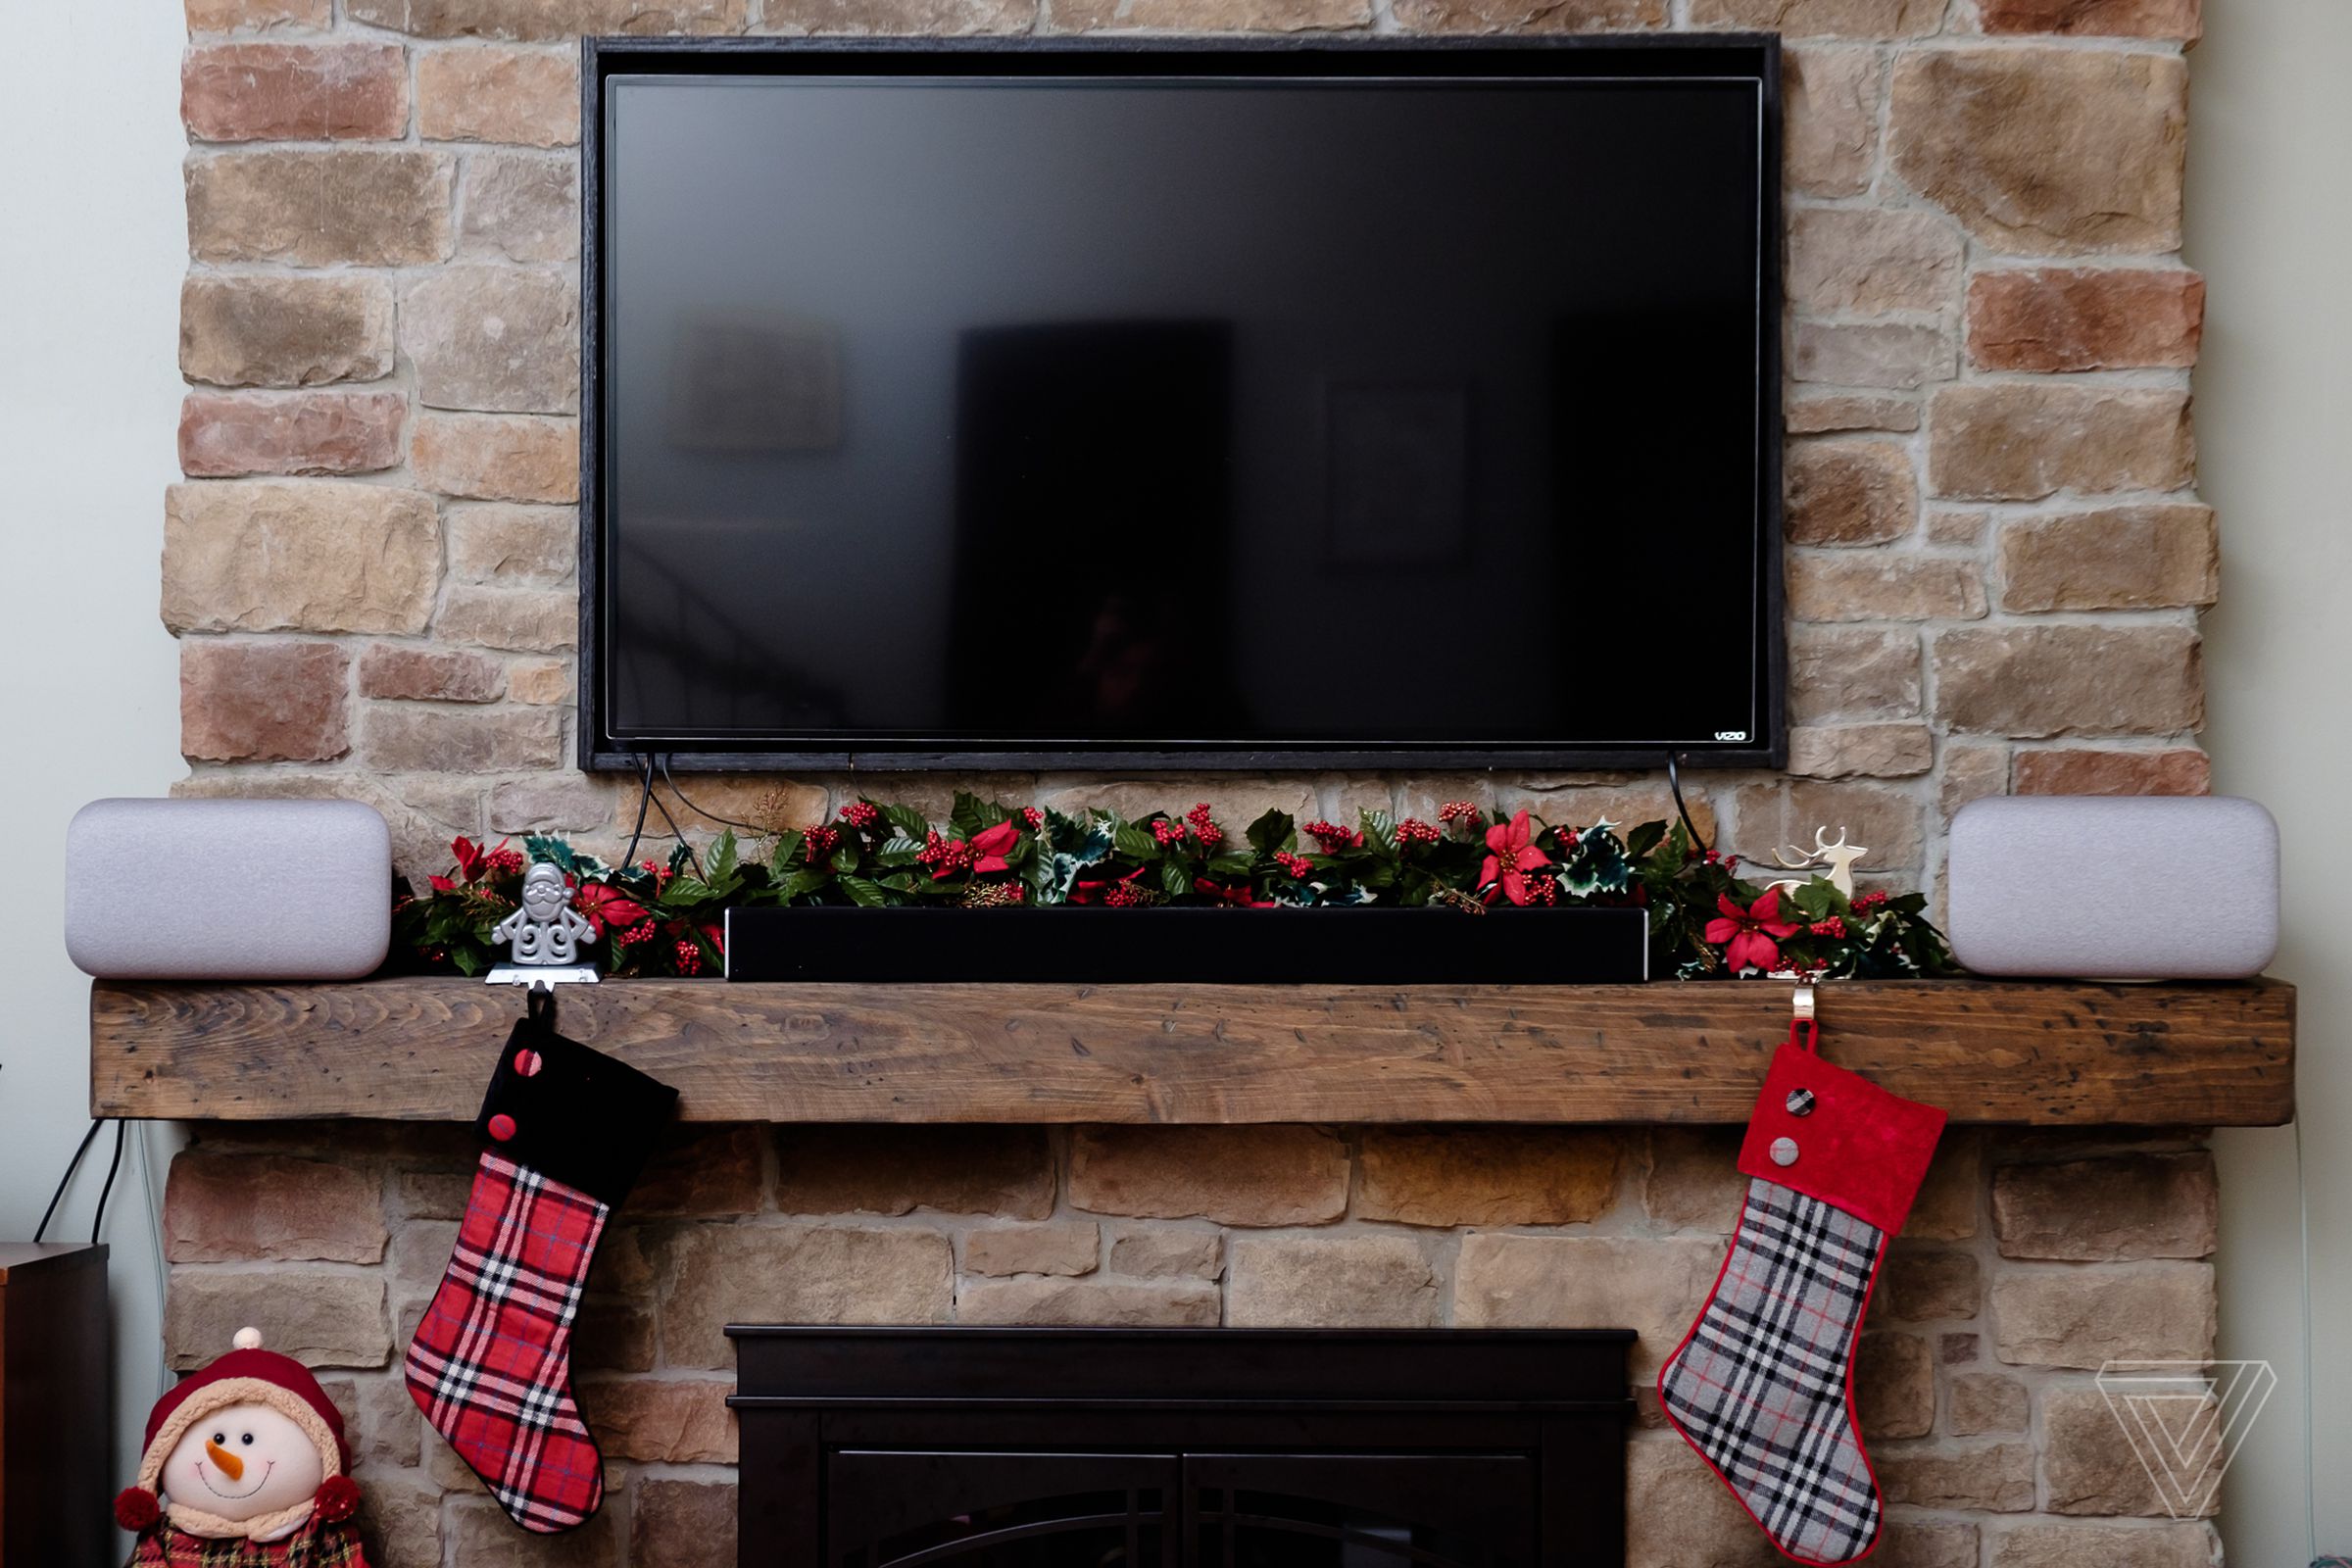 The mantle turned out to not be the best place to put the Home Max speakers, which are larger and heavier than any other smart speaker.